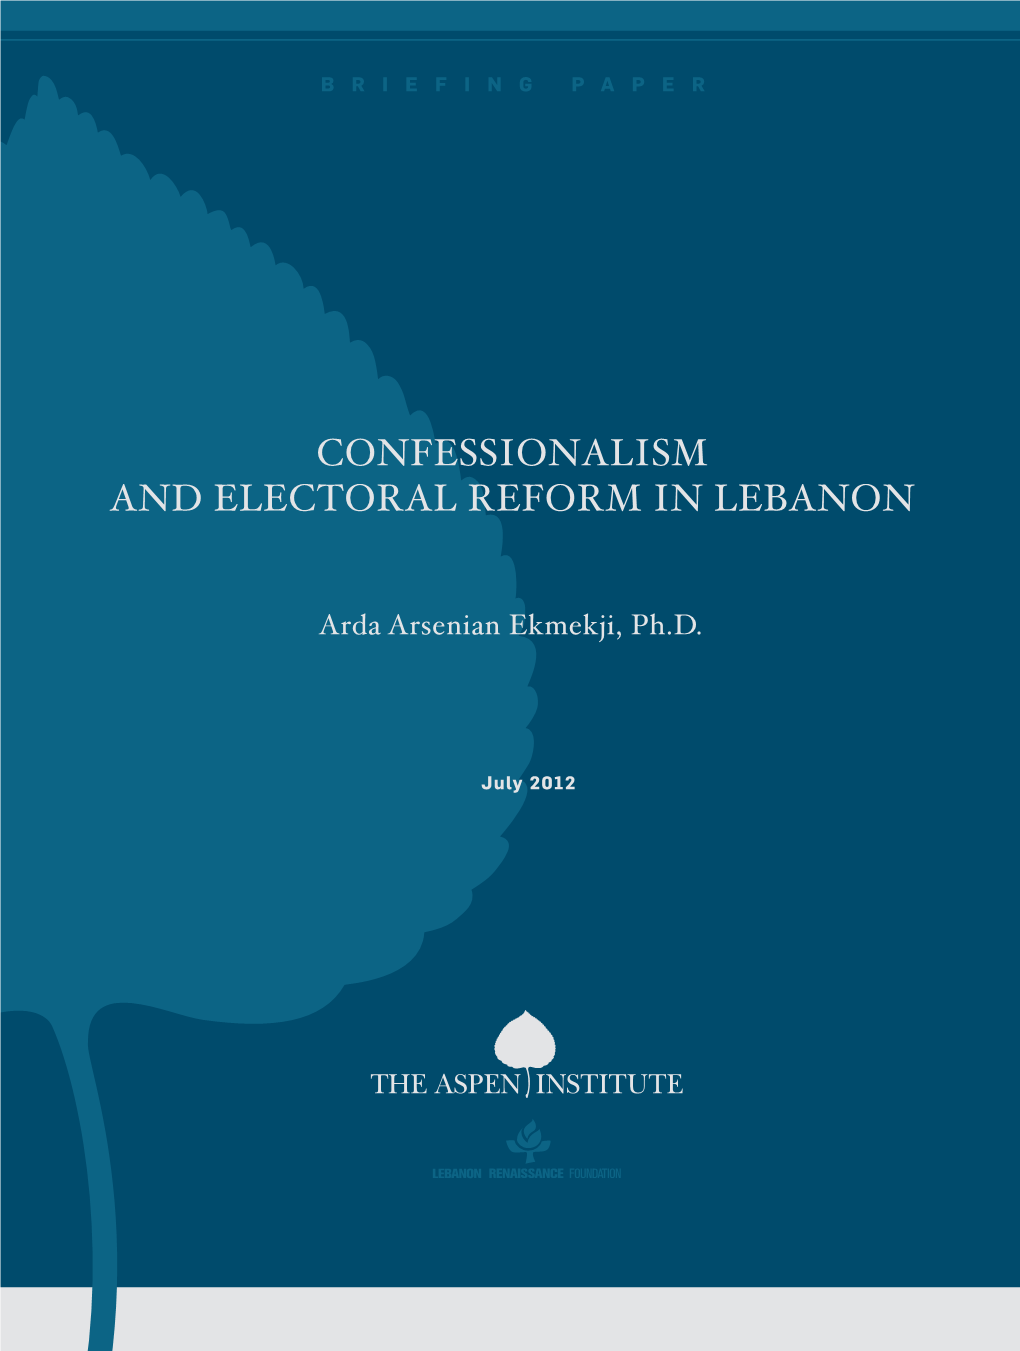 Confessionalism and Electoral Reform in Lebanon